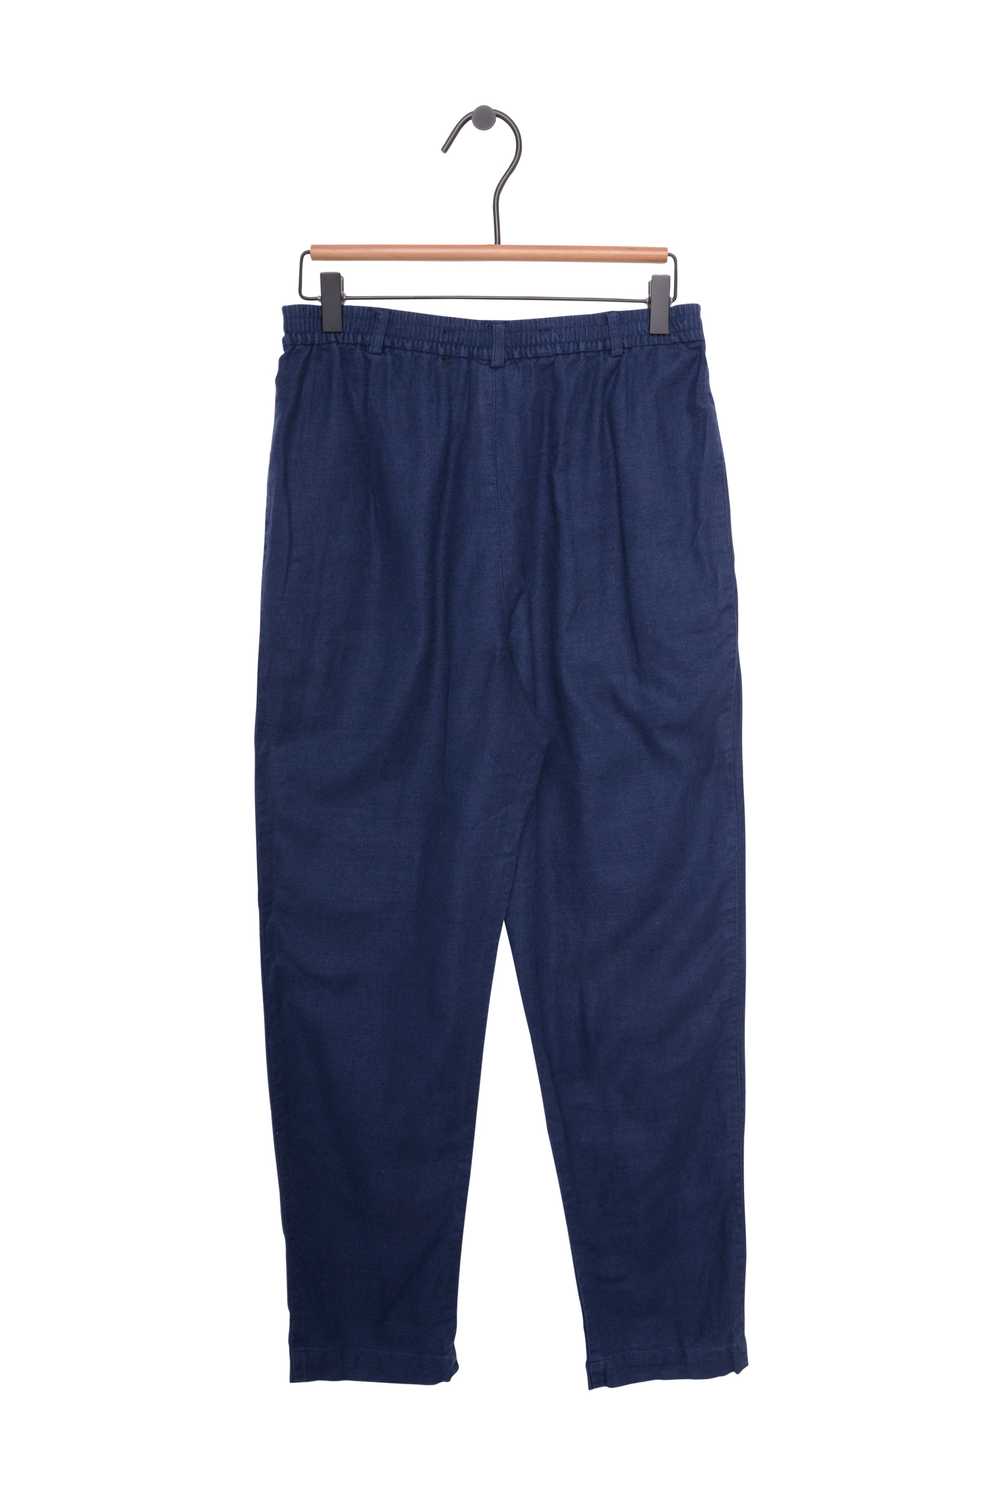 Linen Trousers - image 3